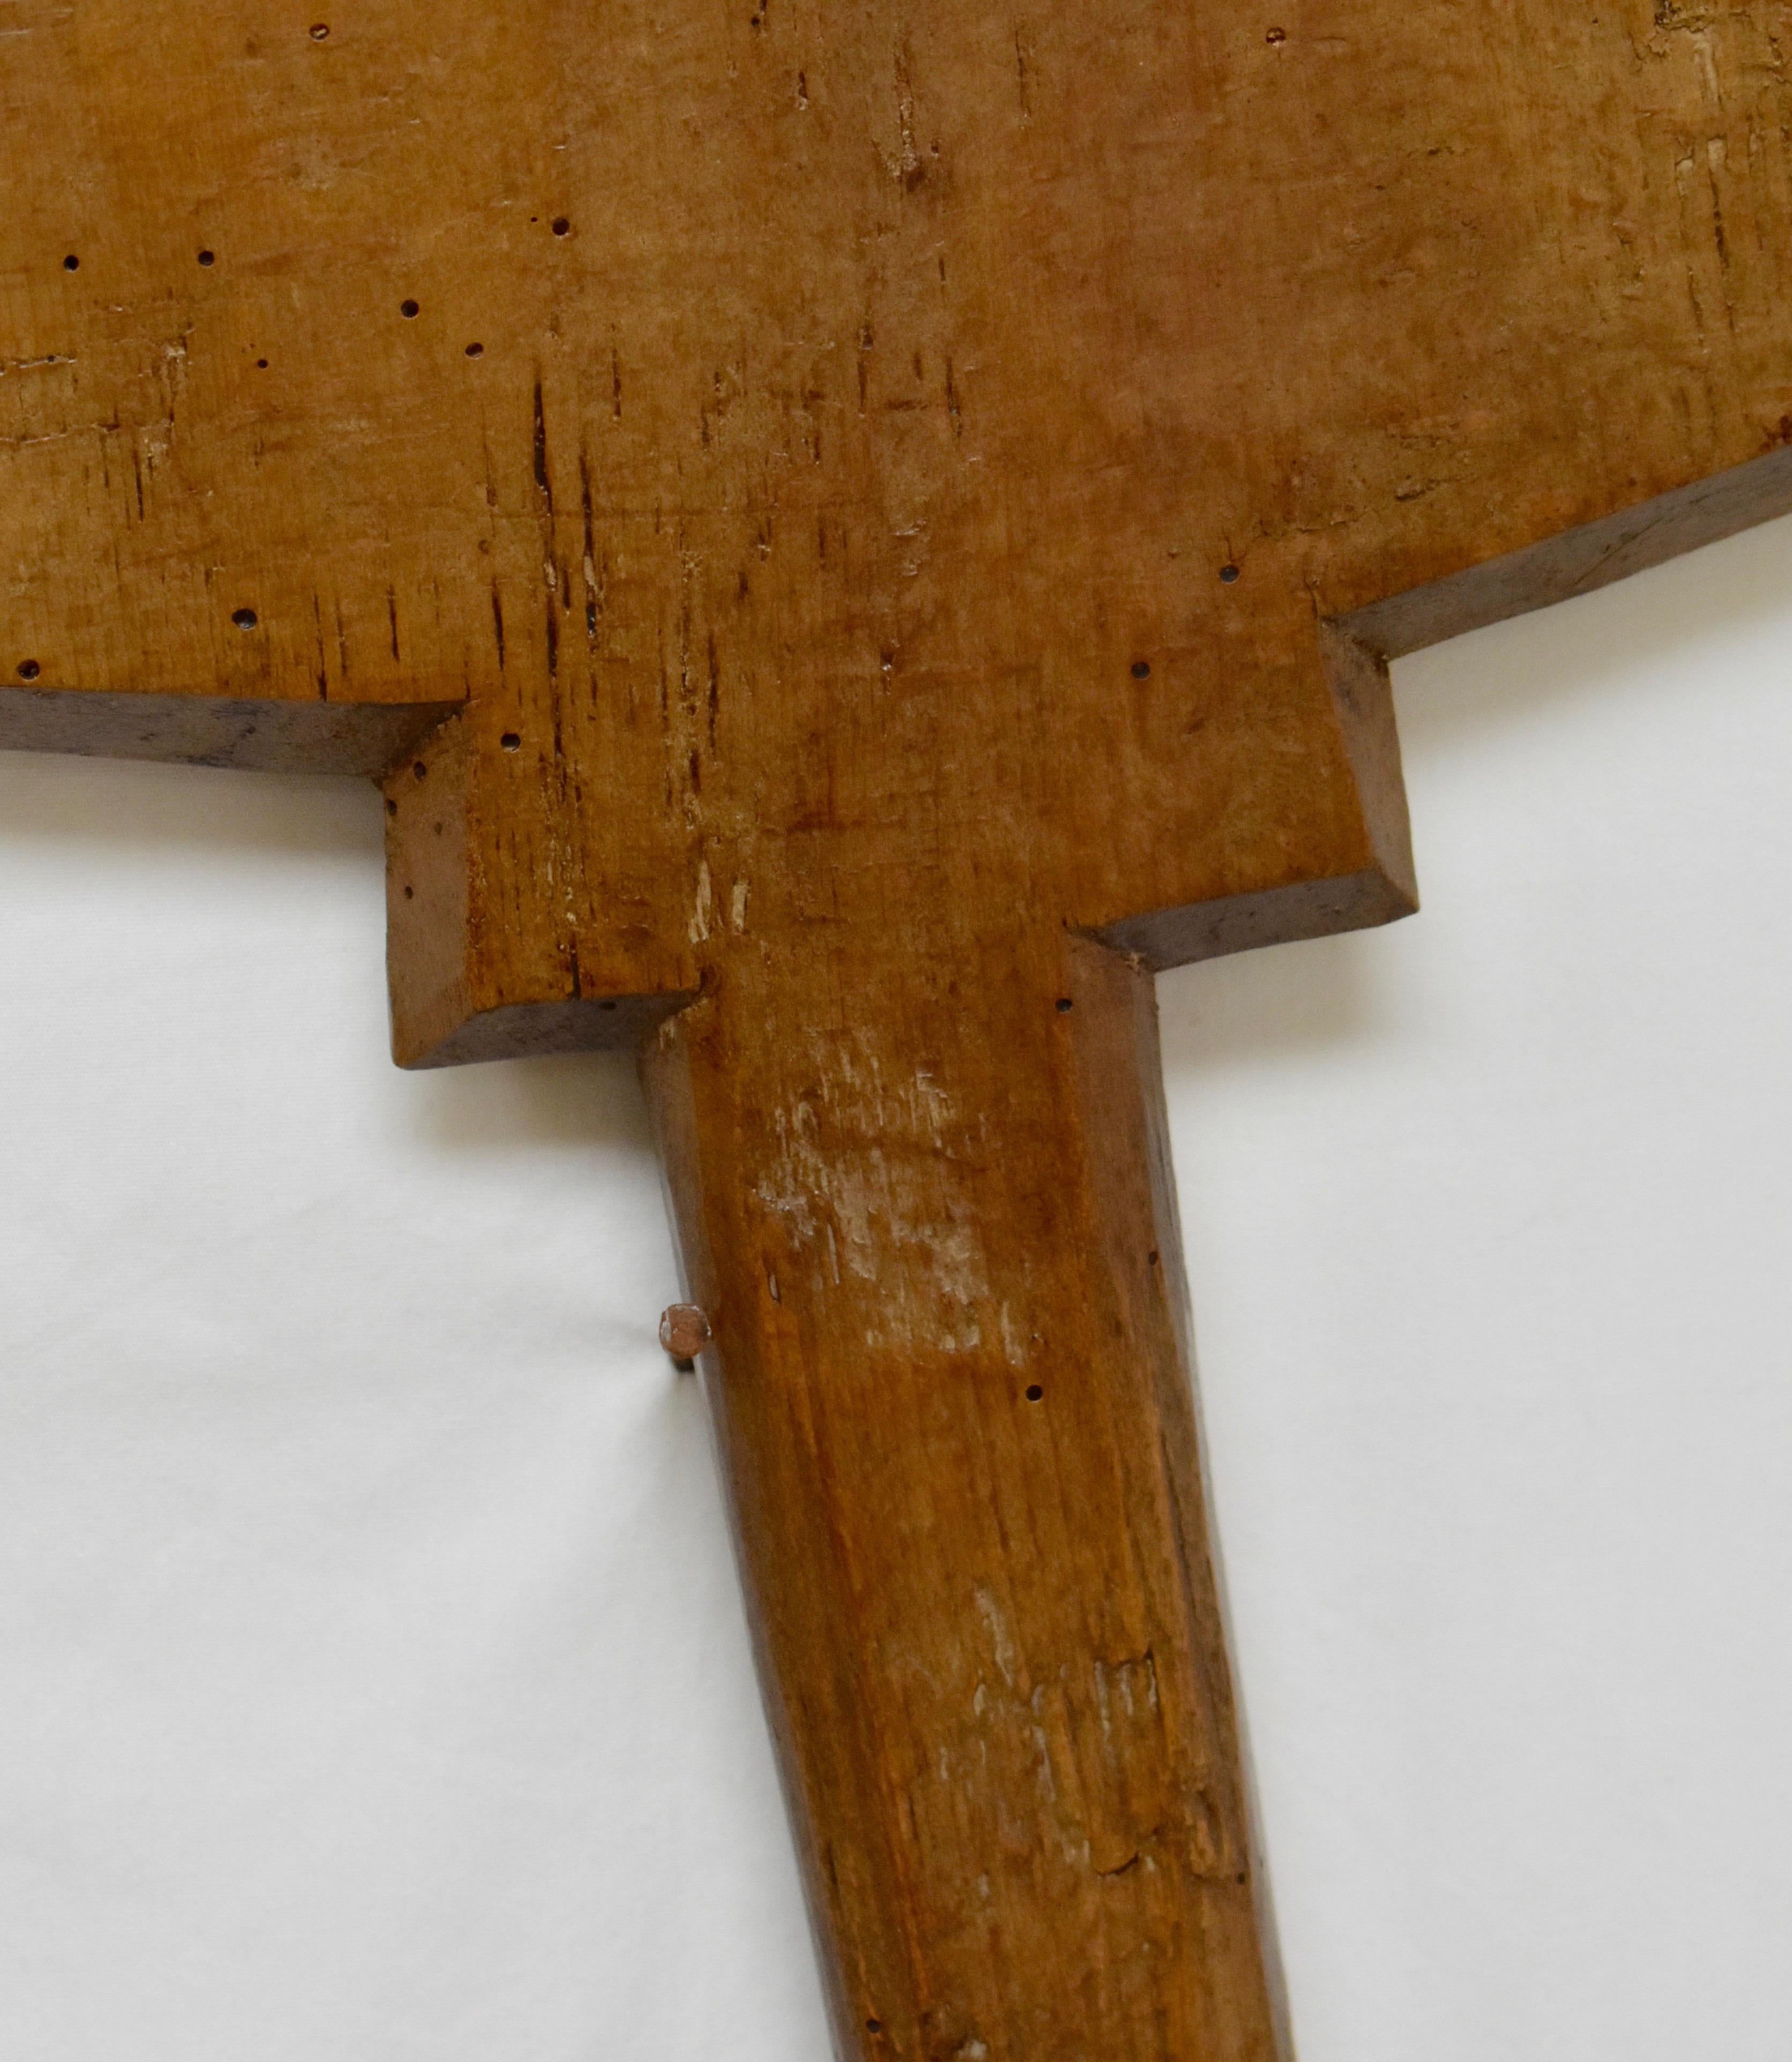 A vintage oak bread peel, hand-carved from a single board. The shaft is worn smooth and the large paddle shows only very slight charring.